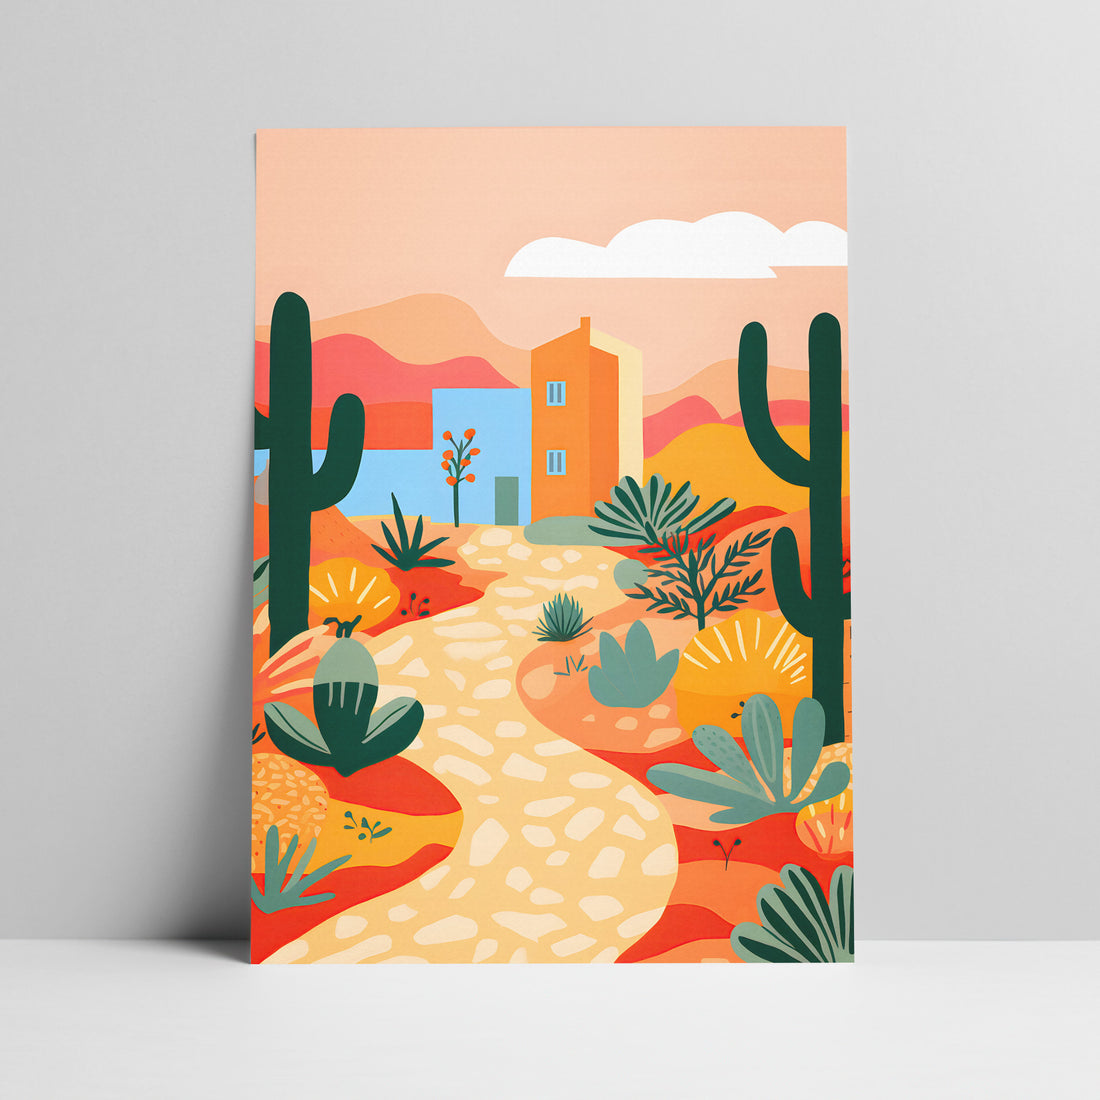 Art print of desert landscape illustration with cacti and house